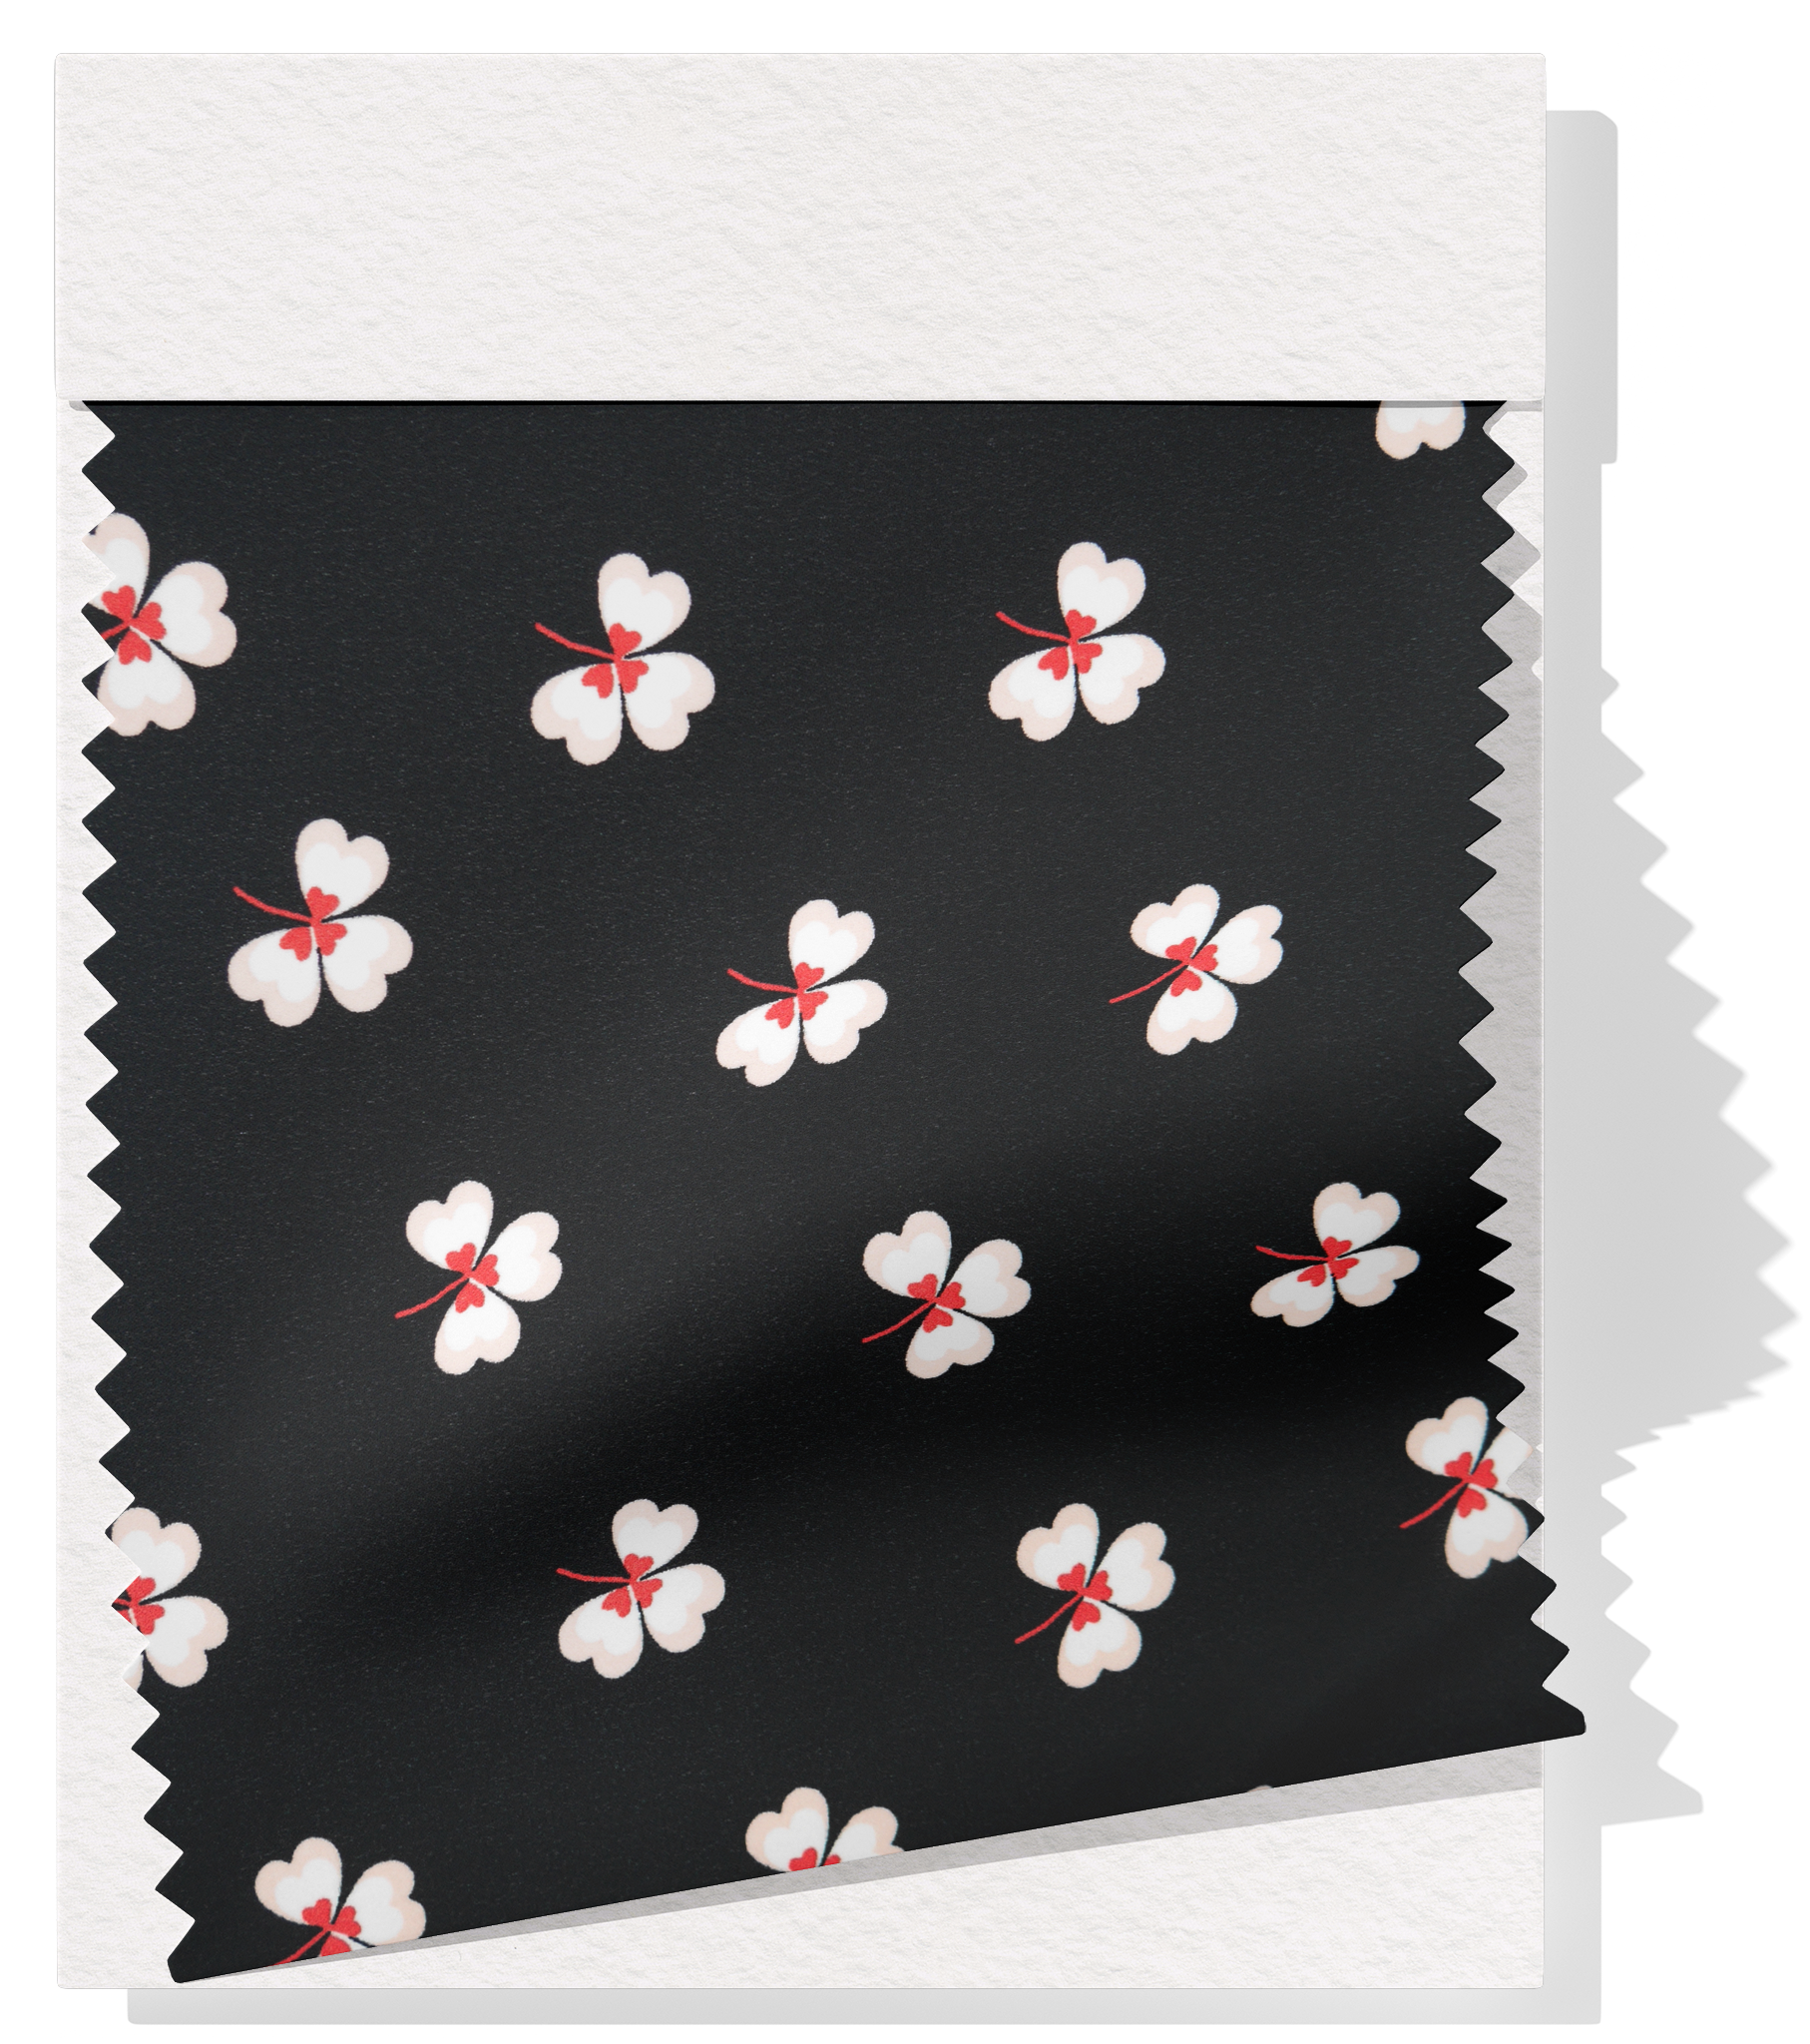 Printed Polyester $10.00p/m - Black w/ white flower  (Online Only)